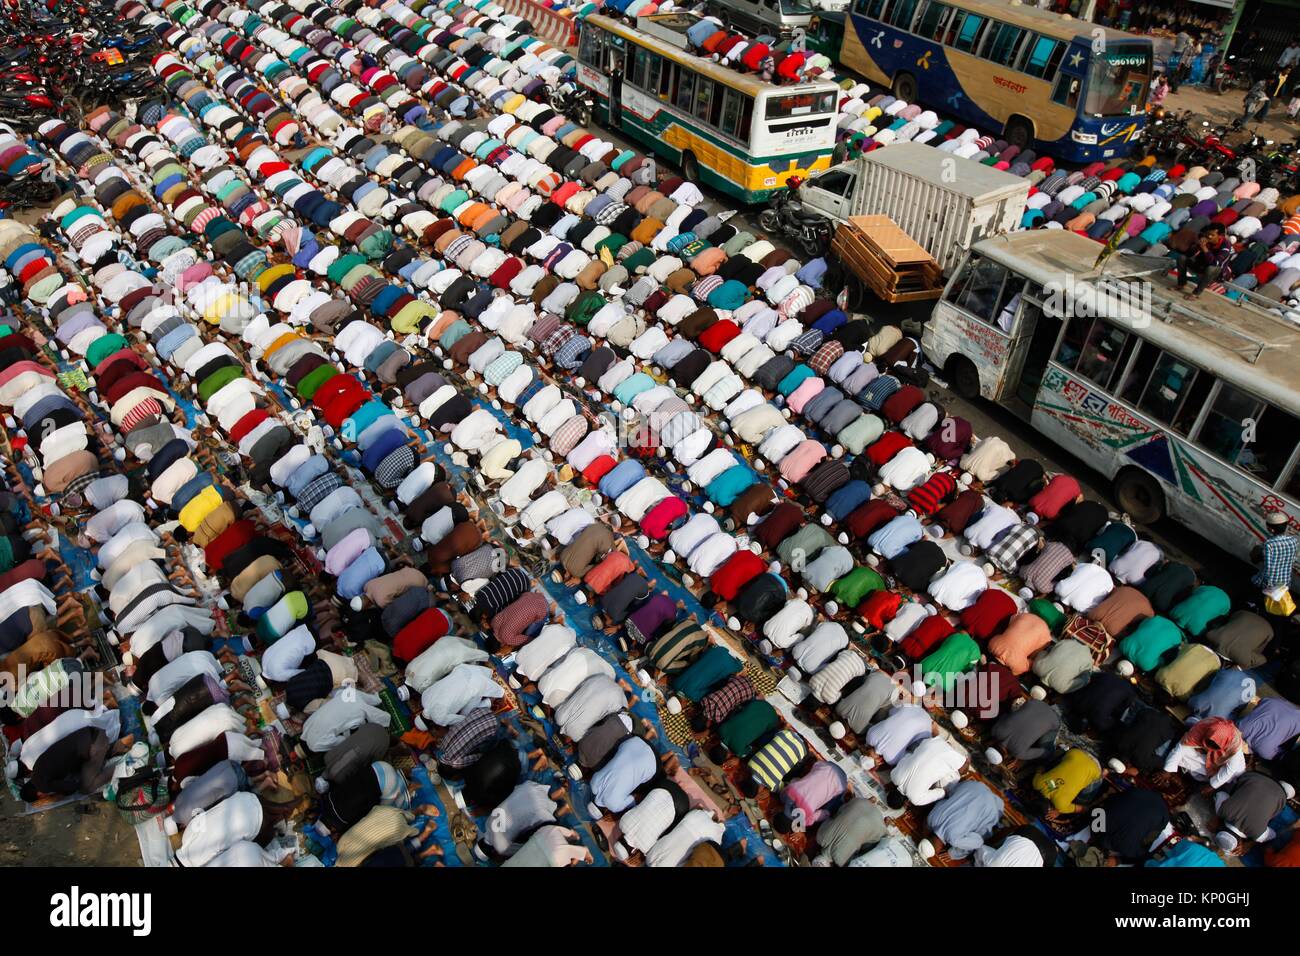 Muslim devotees offer Jumma prayers while attending the World Muslim Congregation, also known as Biswa Ijtema, at Tongi, on the outskirts of the Stock Photo